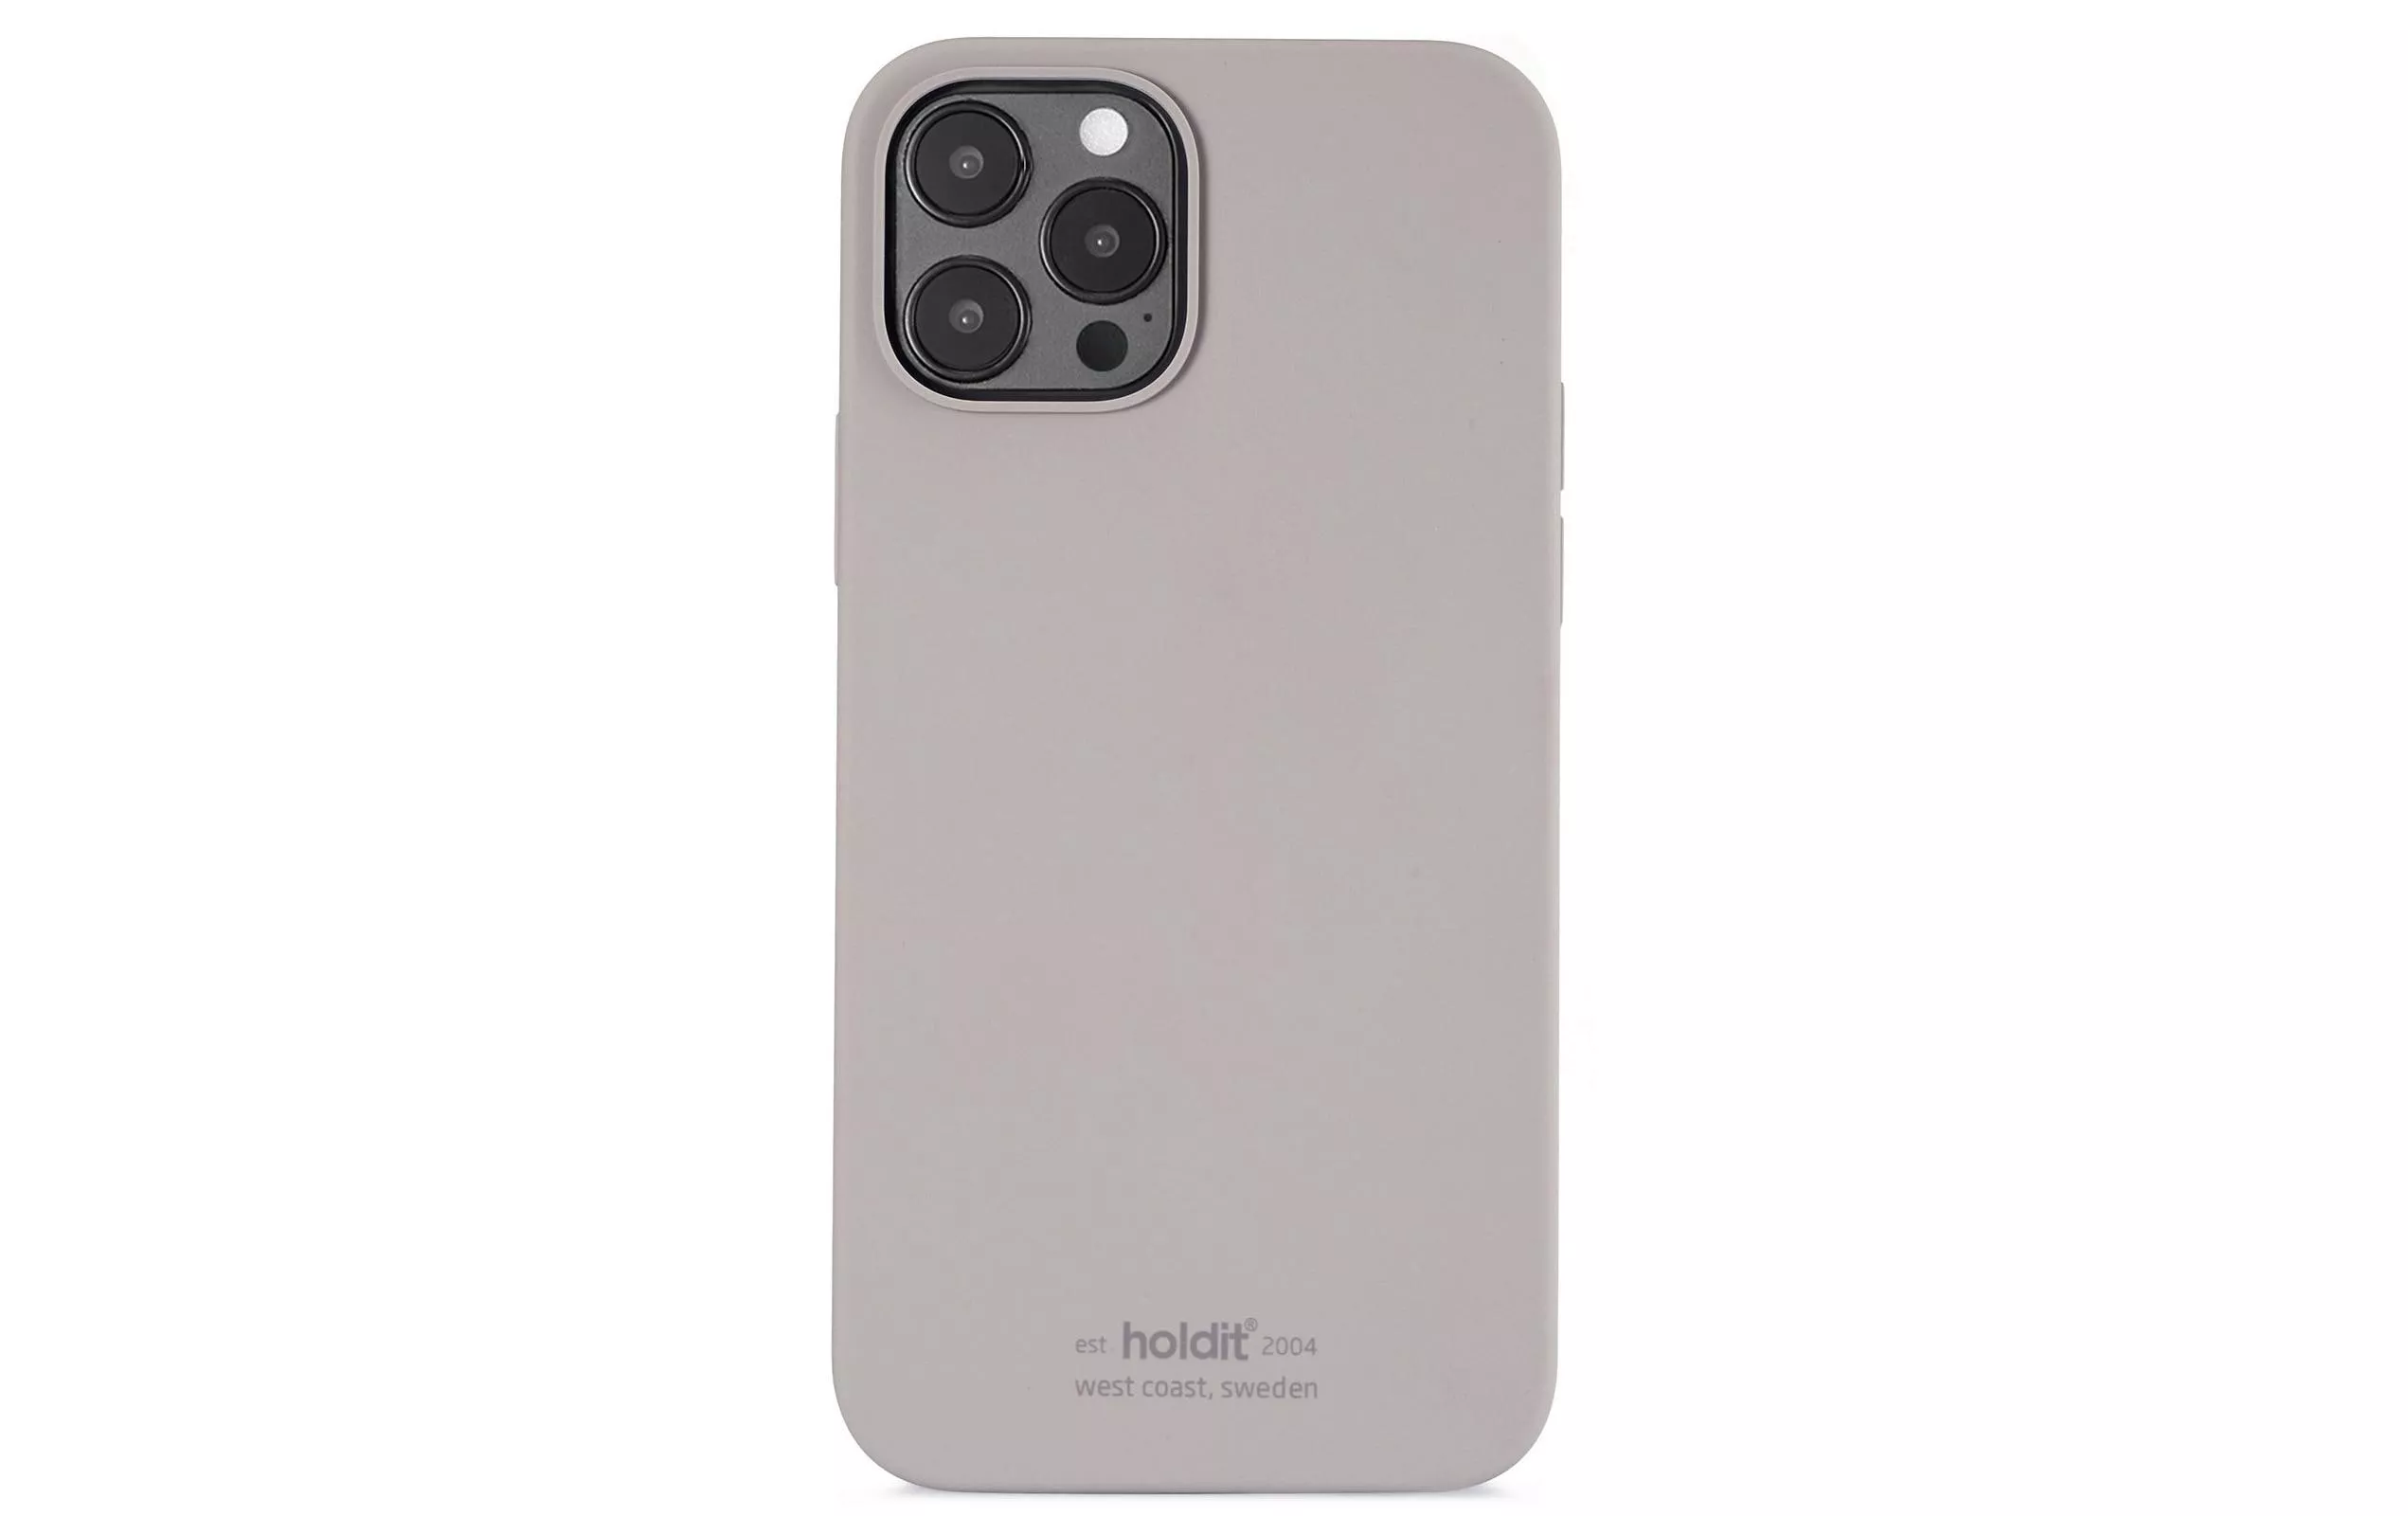 Coque arrière Silicone iPhone 12 Pro Max Taupe